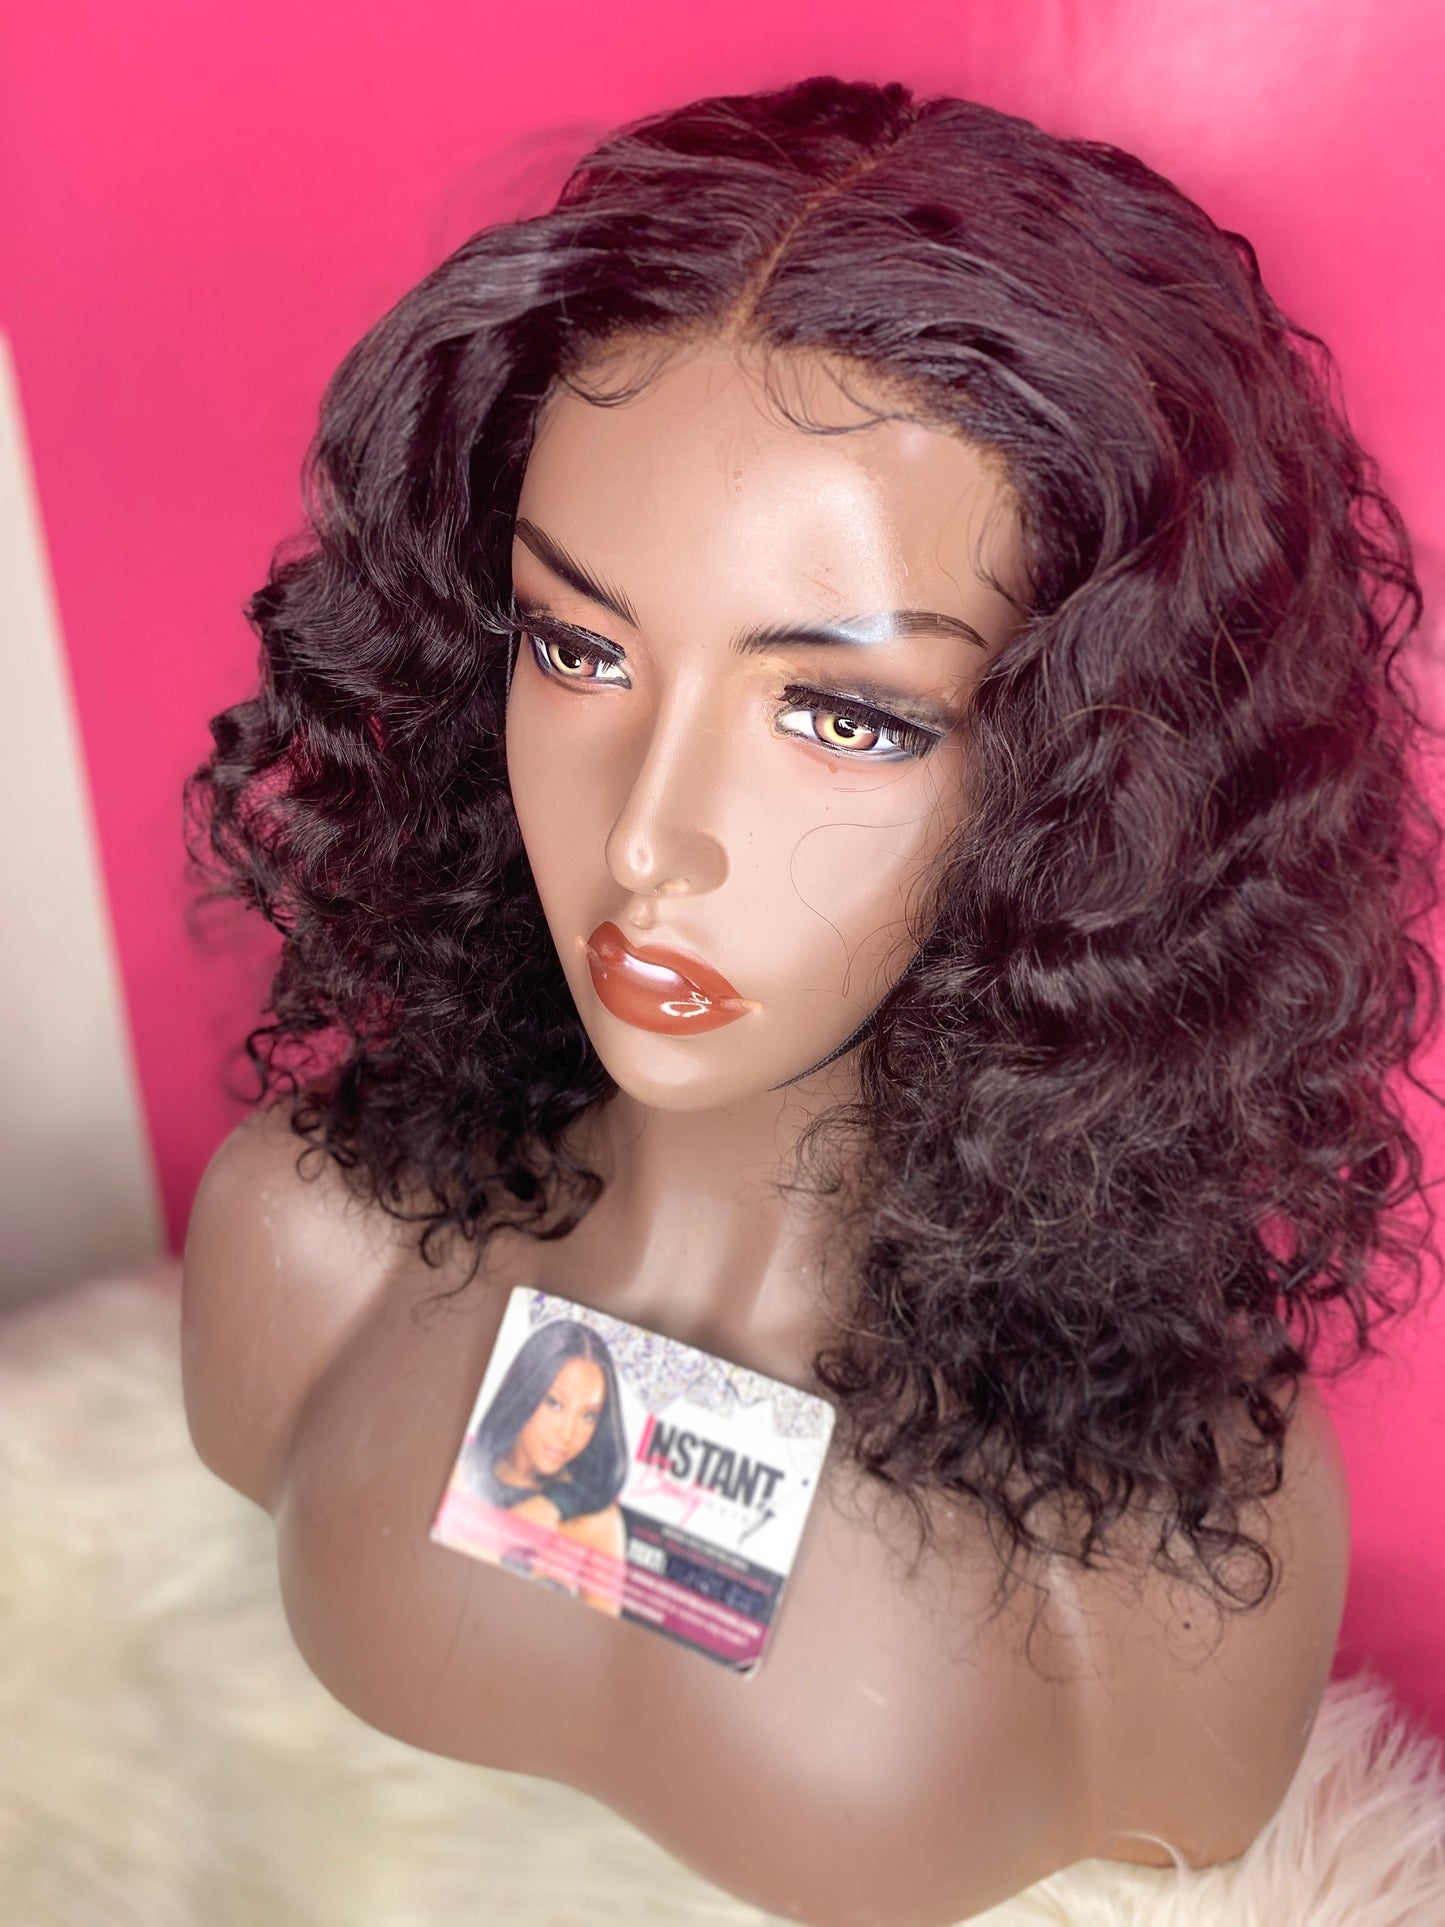 “Tammy Unit”: 12” Lace Closure Wig - Instant Beauty Hair